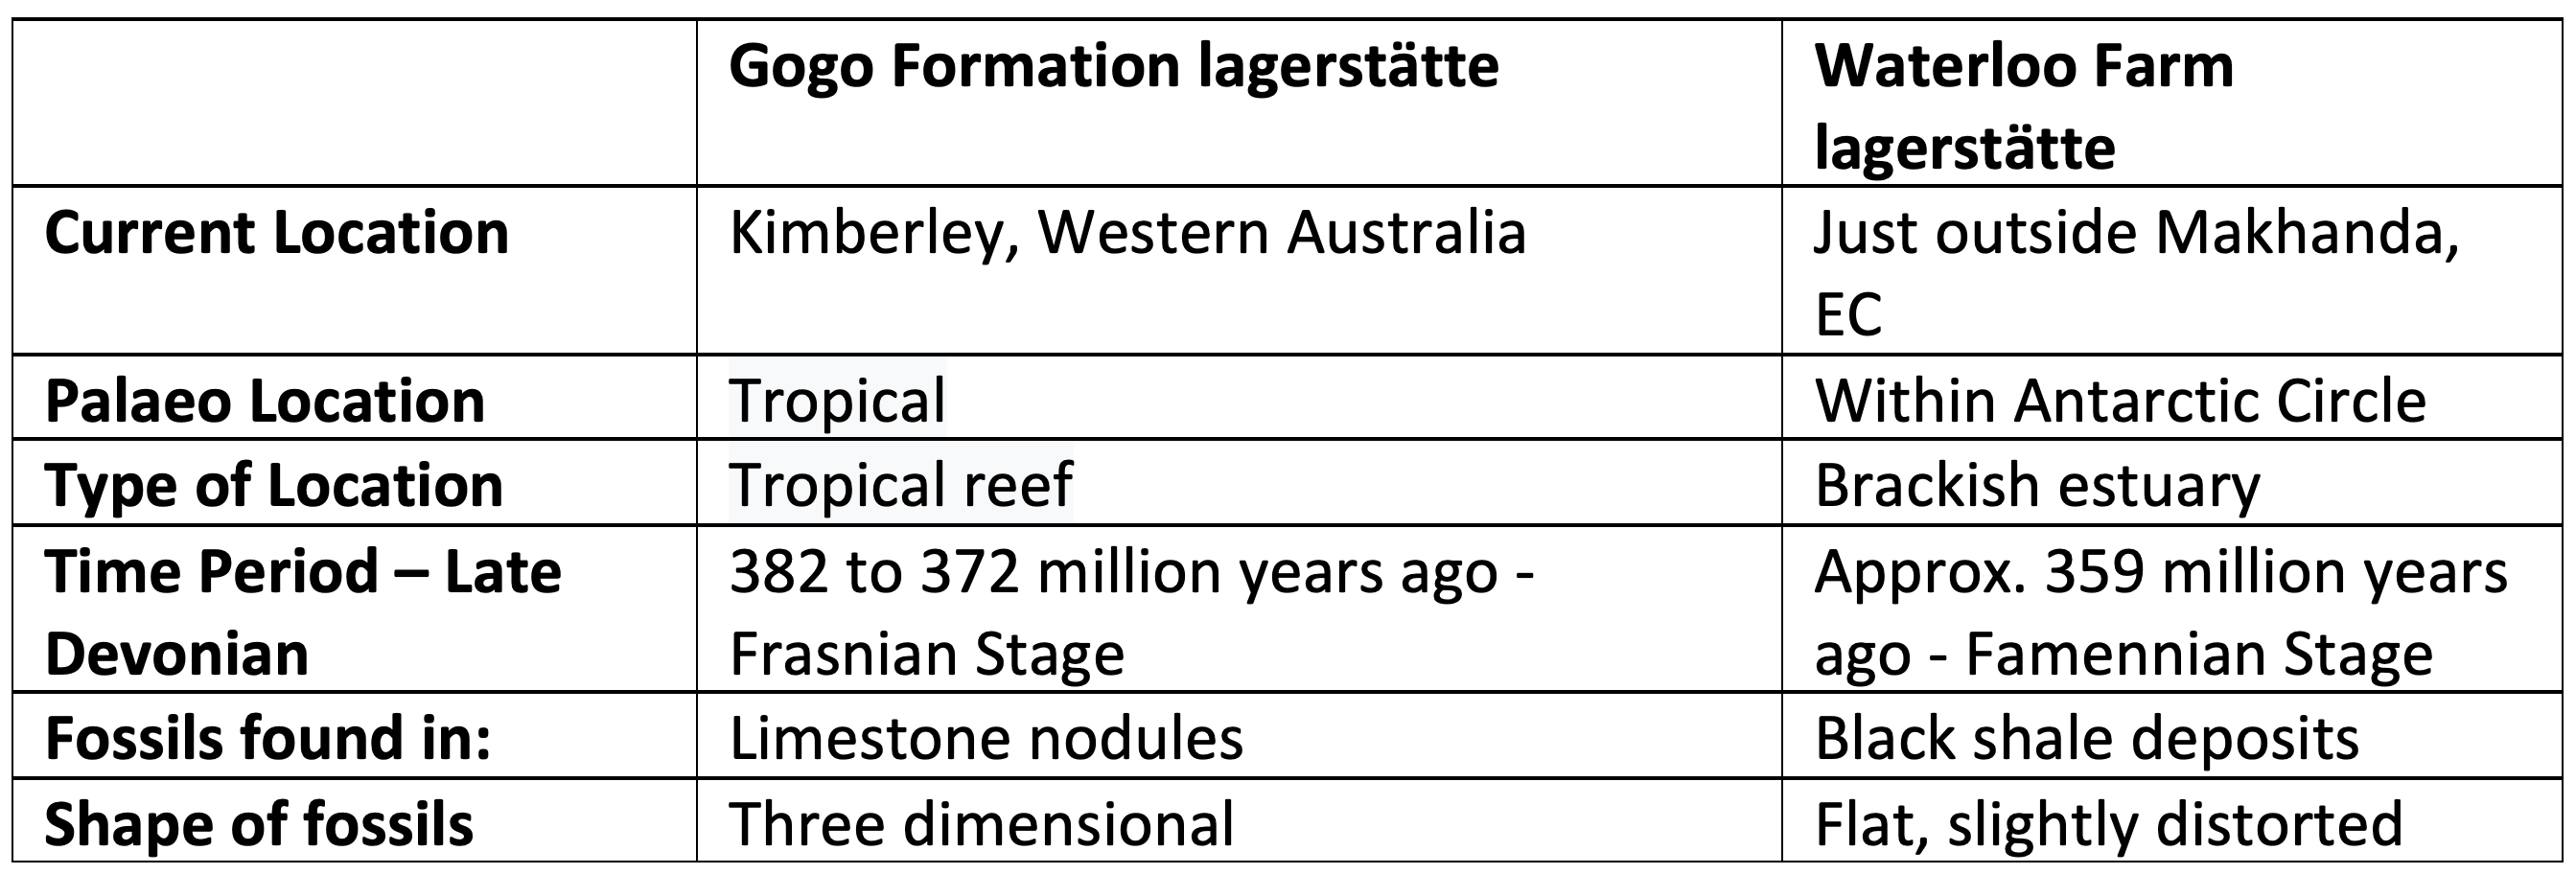 Table comparing the discoveries of fossils at the Gogo Formation in Western Australia and the Black Shale Deposits on Waterloo Farm just outside Makhanda